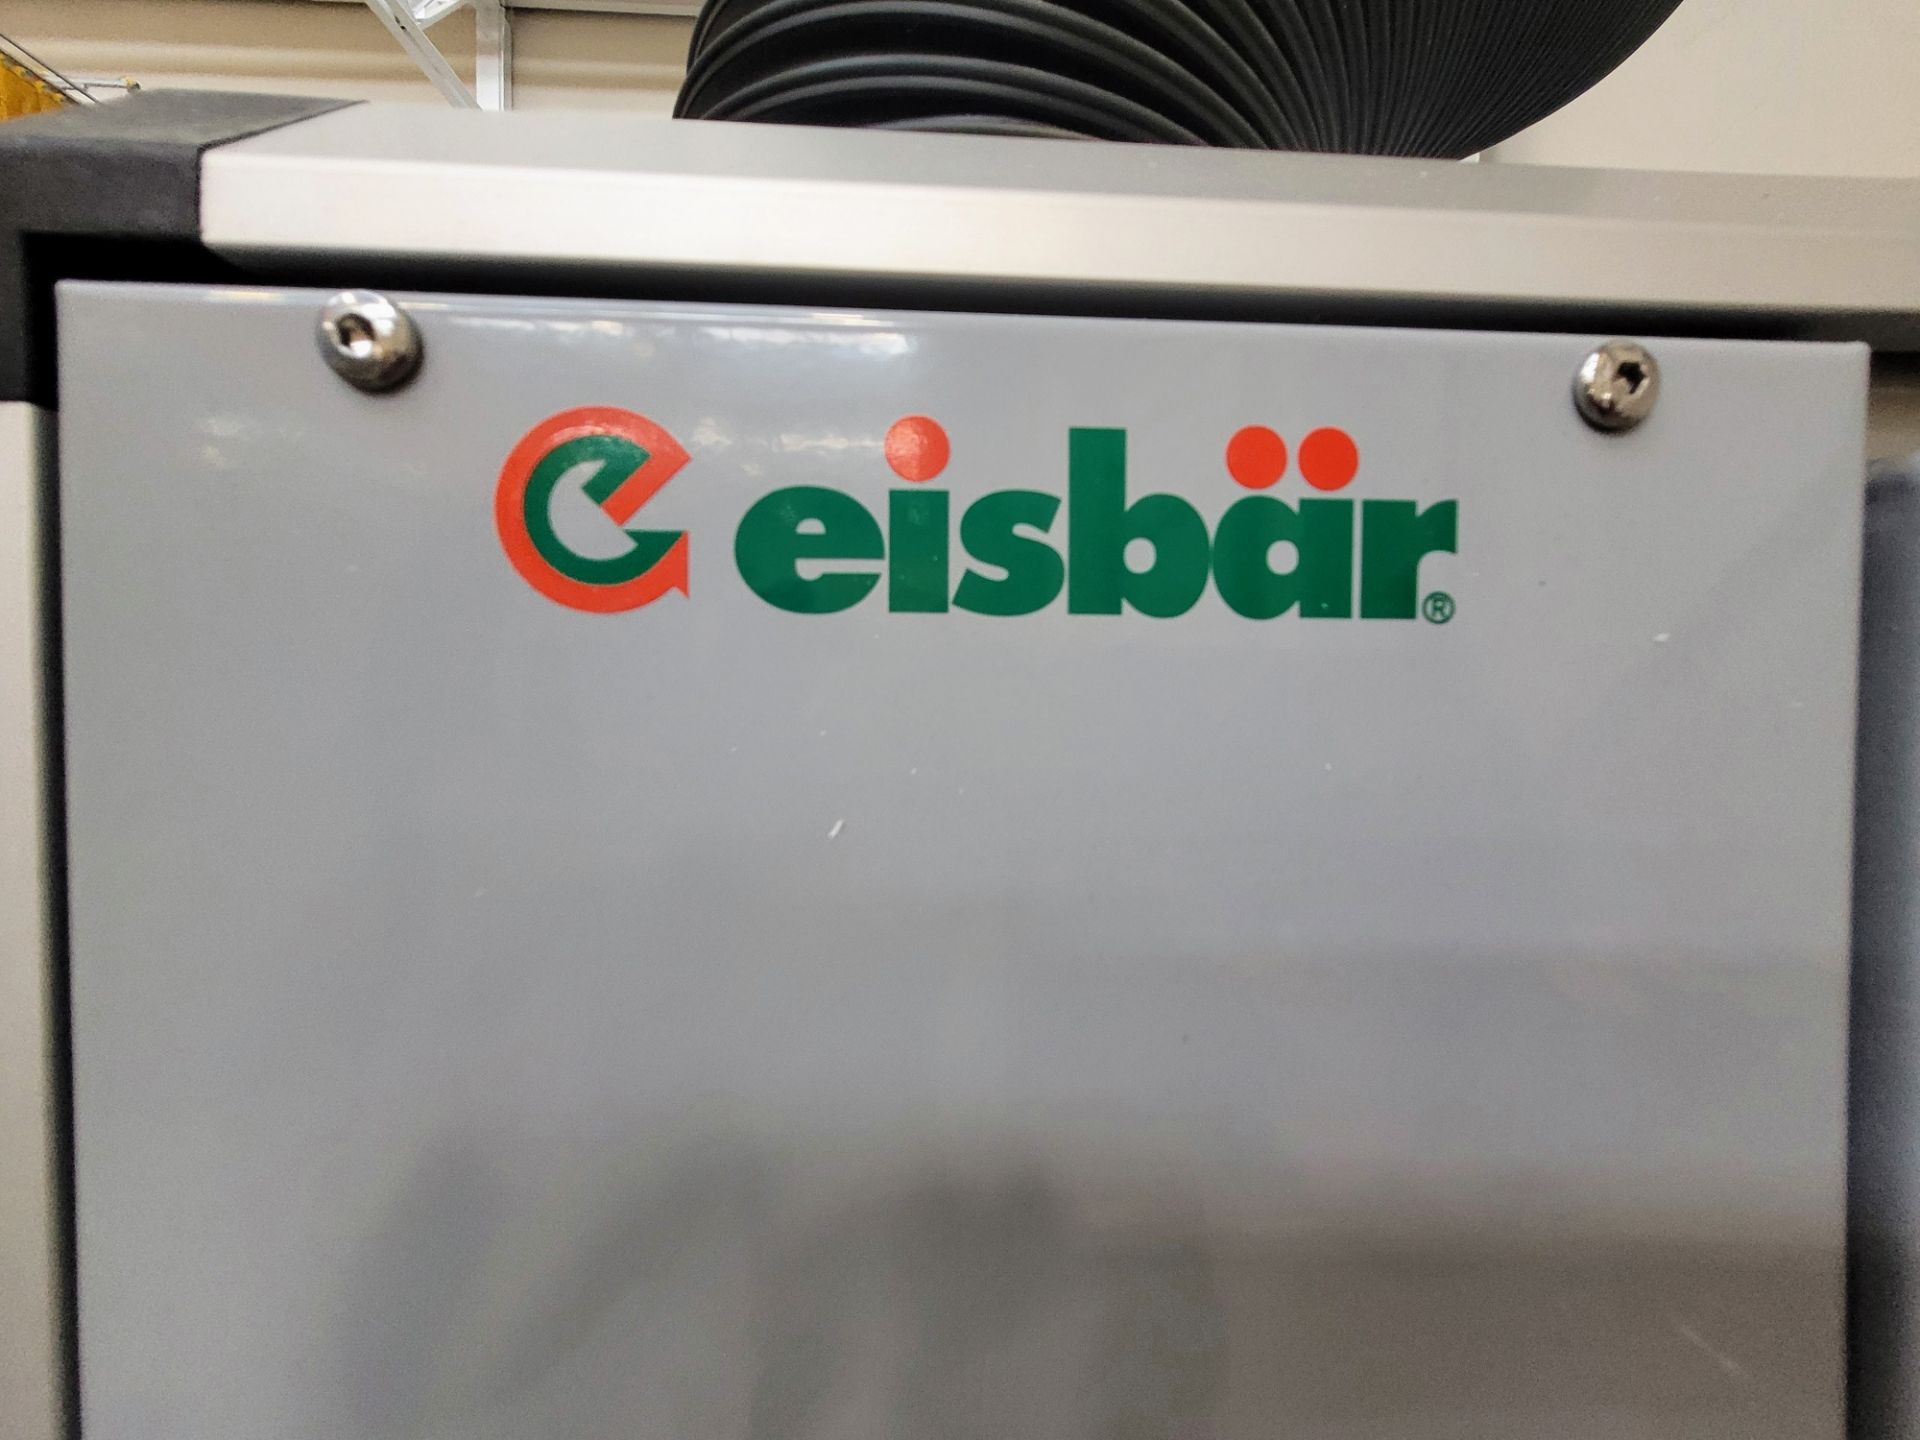 2019 EISBAR DRY AIR SYSTEM, TWO STAGE MOLD DEHUMIDIFICATION - Image 3 of 5